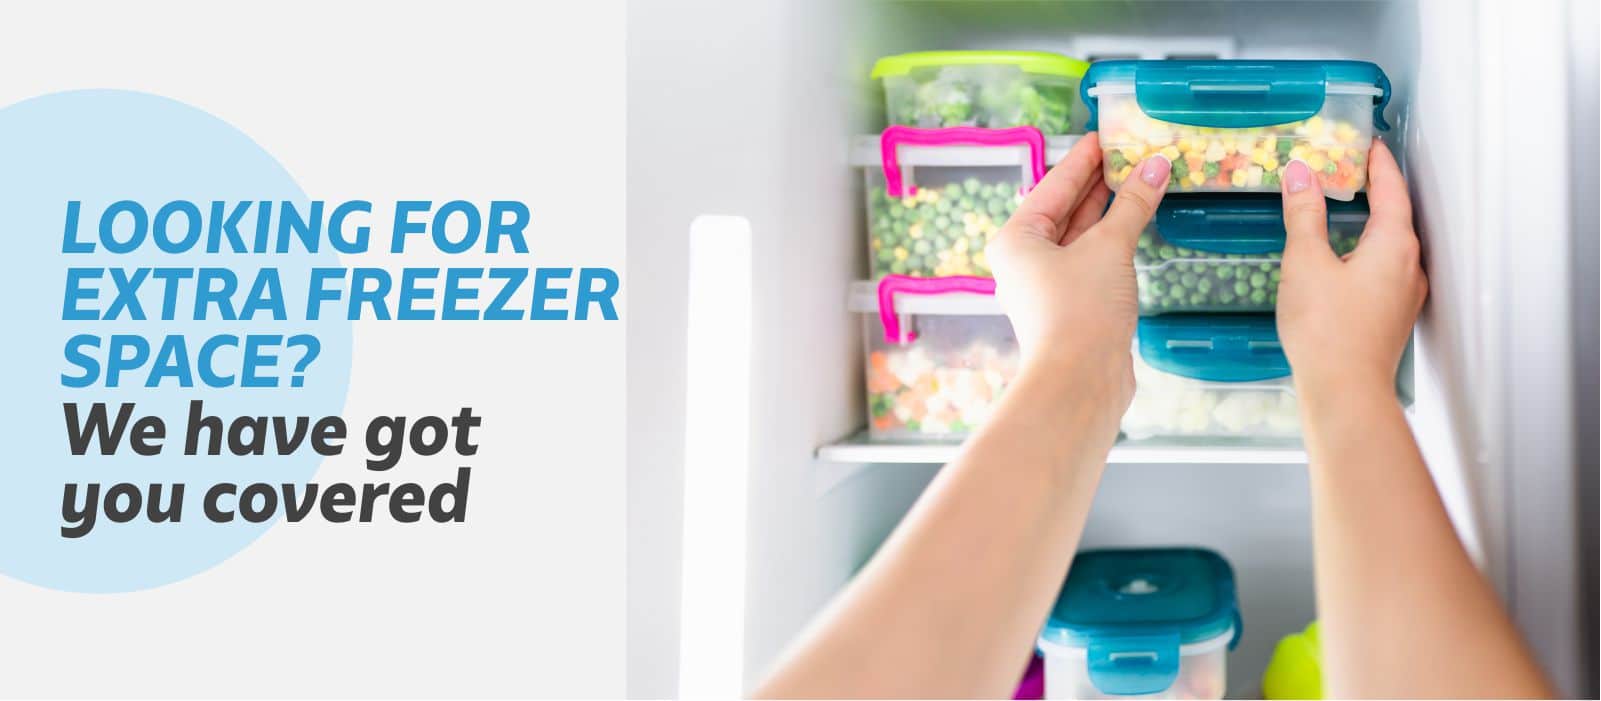 Looking for extra space in your freezer